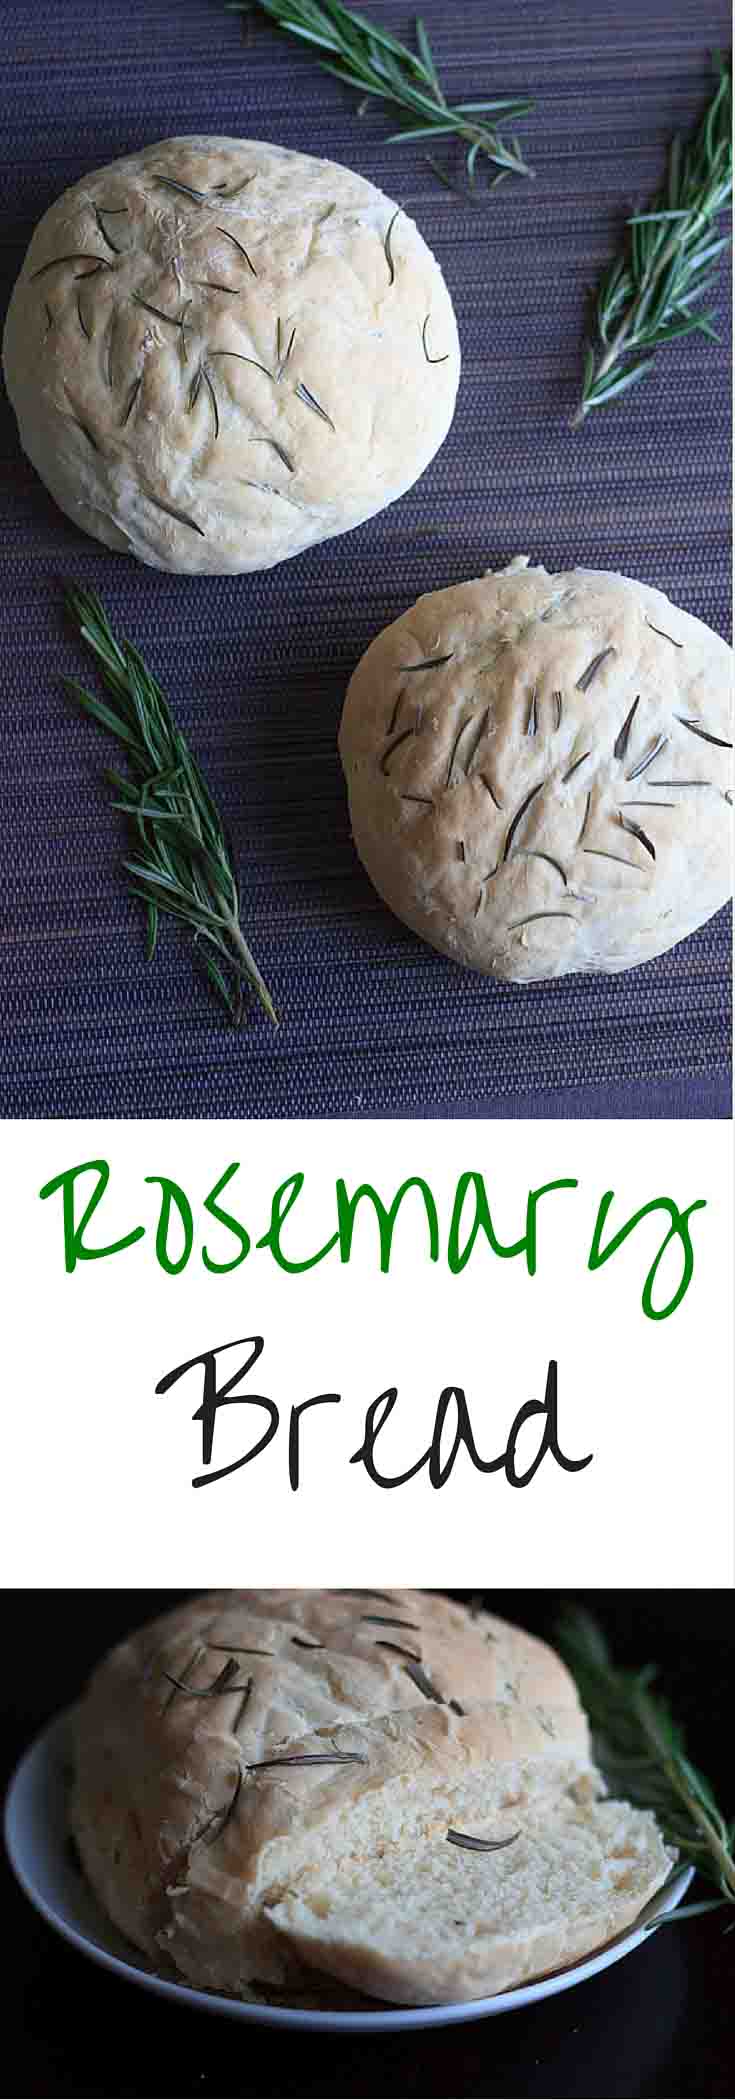 Rosemary Bread - baked with fresh herbs just like Macaroni Grill